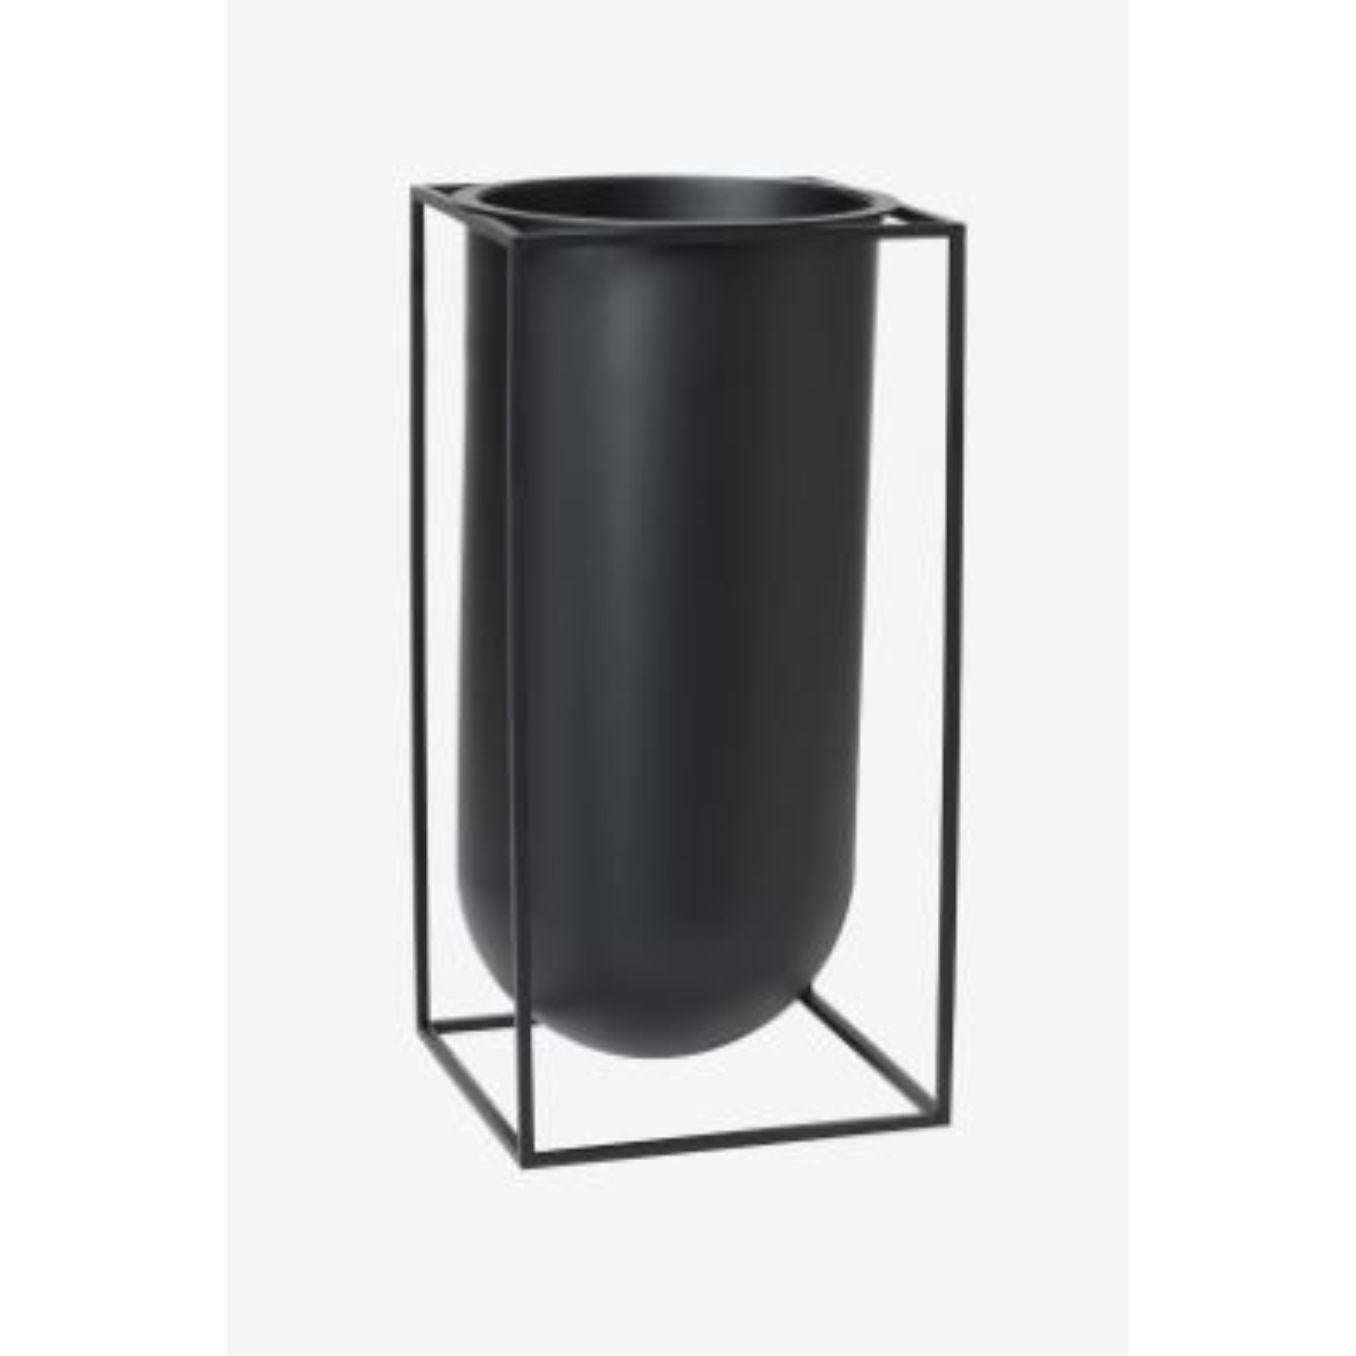 Black Nolia Kubus vase by Lassen
Dimensions: D 20 x W 20 x H 40 cm 
Materials: Metal 
Weight: 3.50 Kg

Staying beautifully grounded with dimensions that work perfectly on this level, the Nolia floor vase is a new member of the iconic Kubus